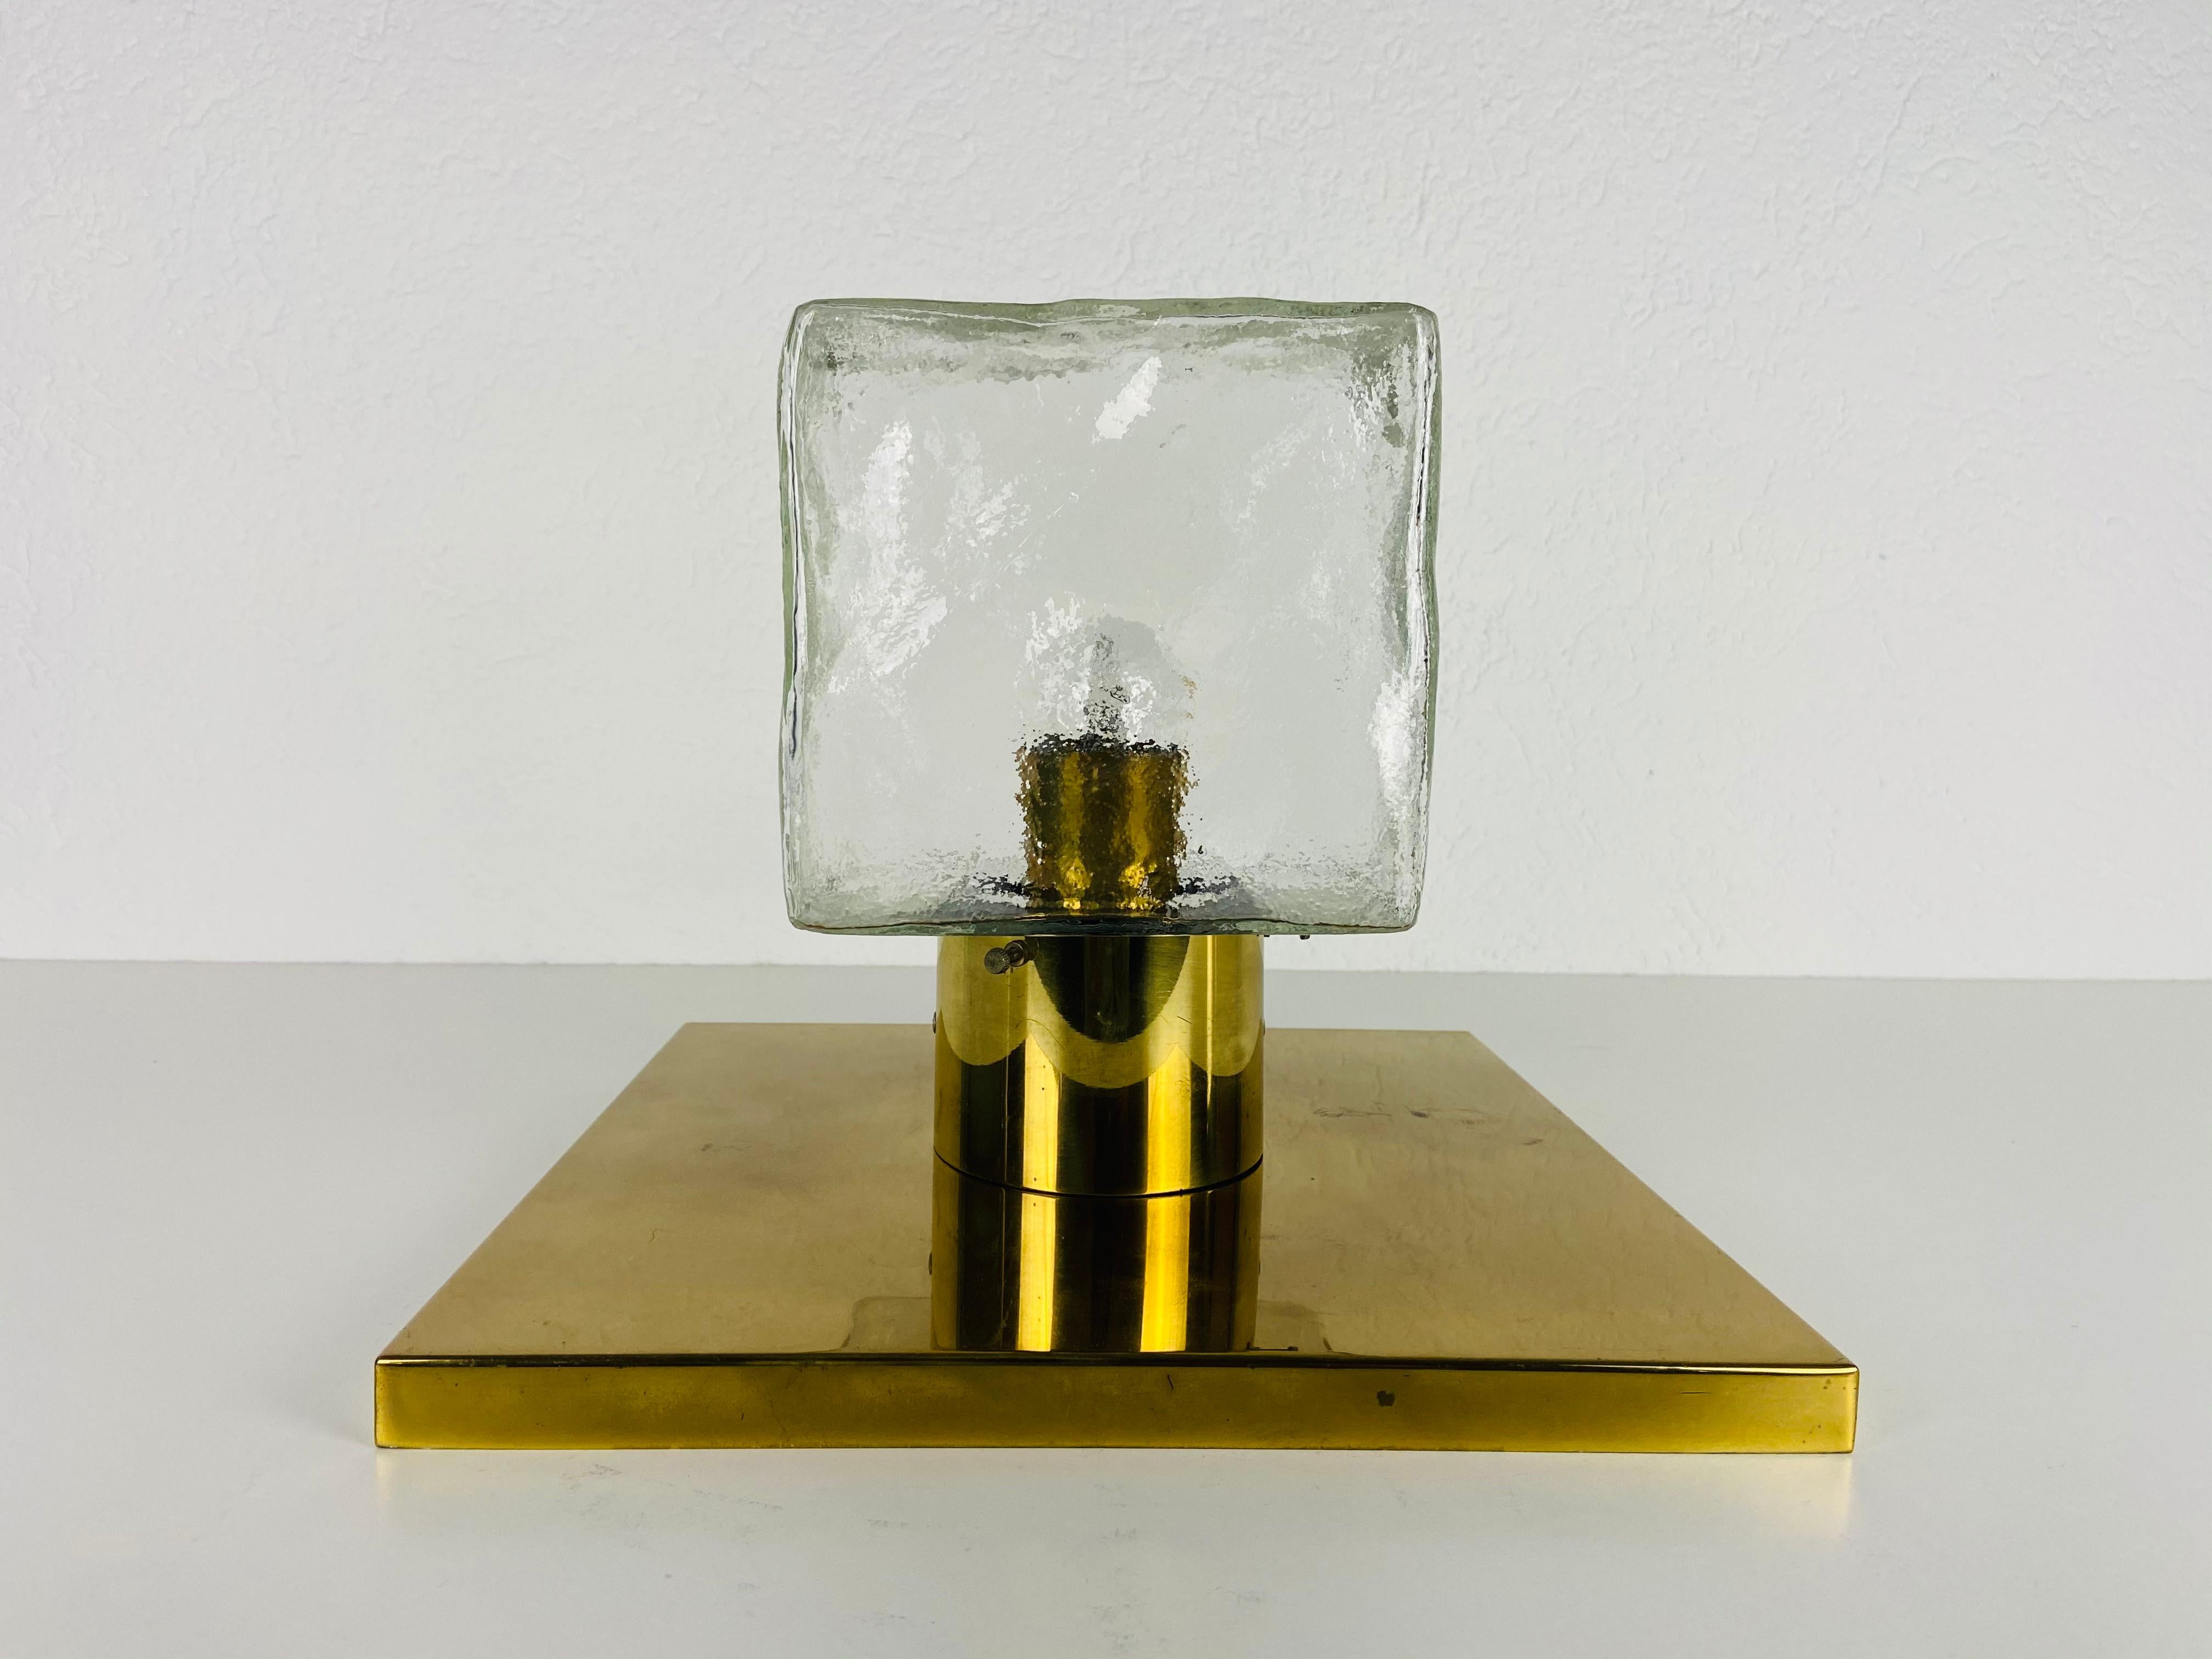 Mid-Century Modern flushmount by the Austrian brand Kalmar made in the 1960s years. Brass base with Murano glass shade.

The light requires one E27 (US E26) light bulb. Works with both 120/220 V. Very good vintage condition.

Free worldwide